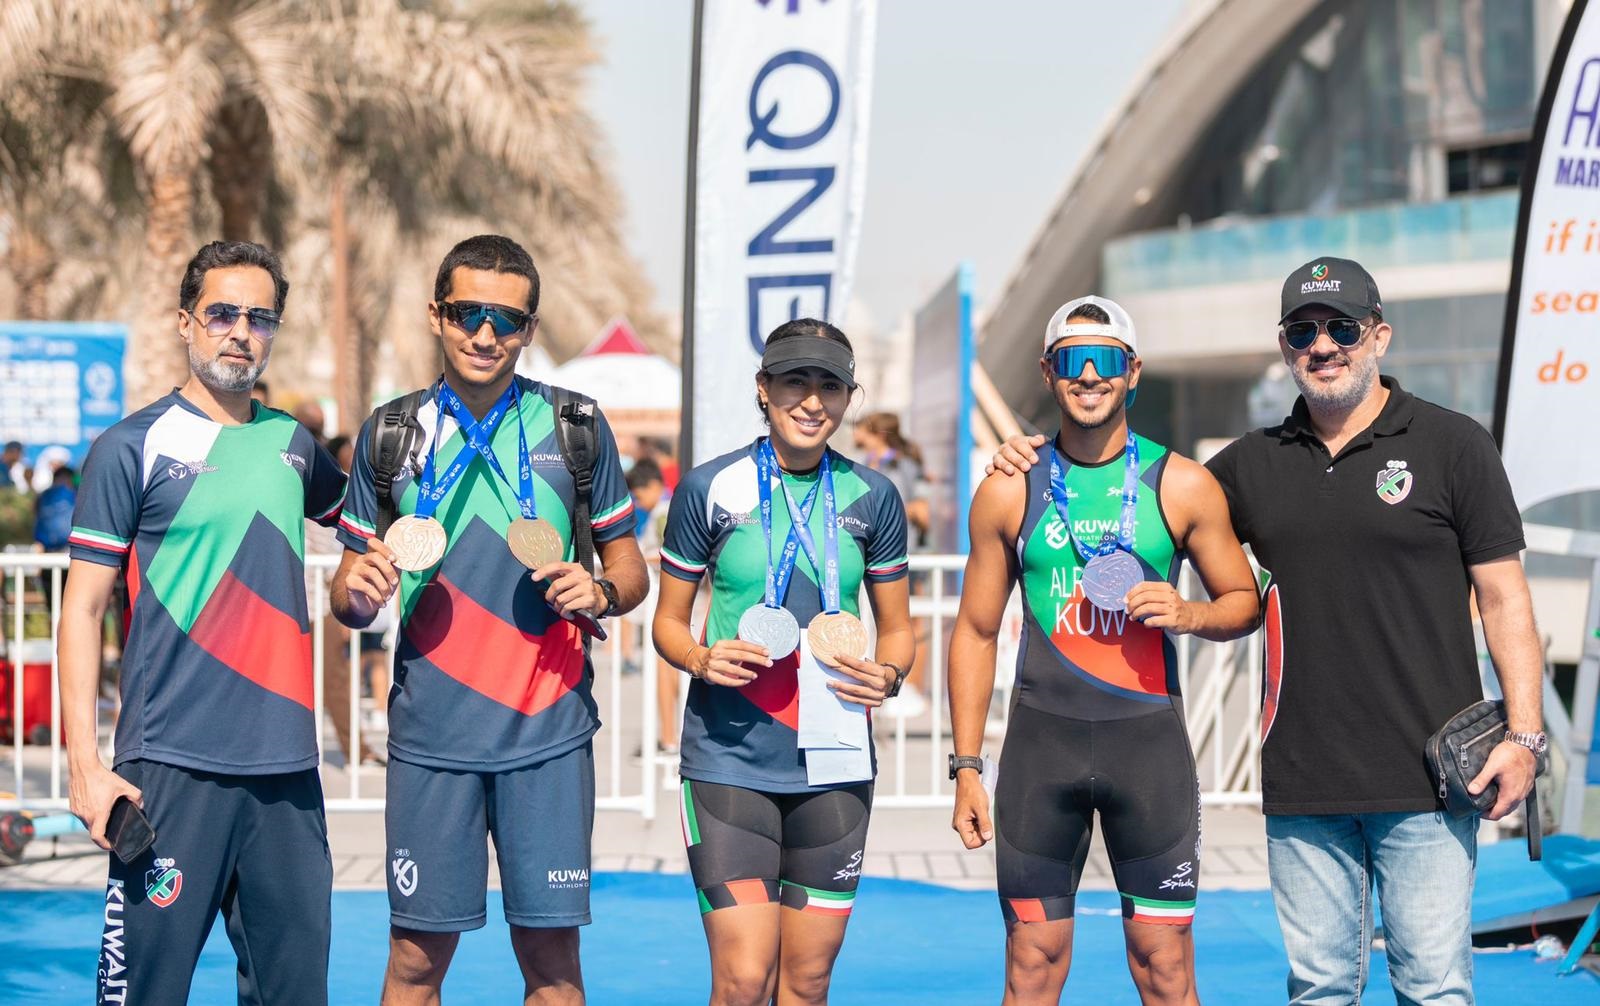 Kuwait grabs 5 medals at '21 Asia Triathlon Cup Doha